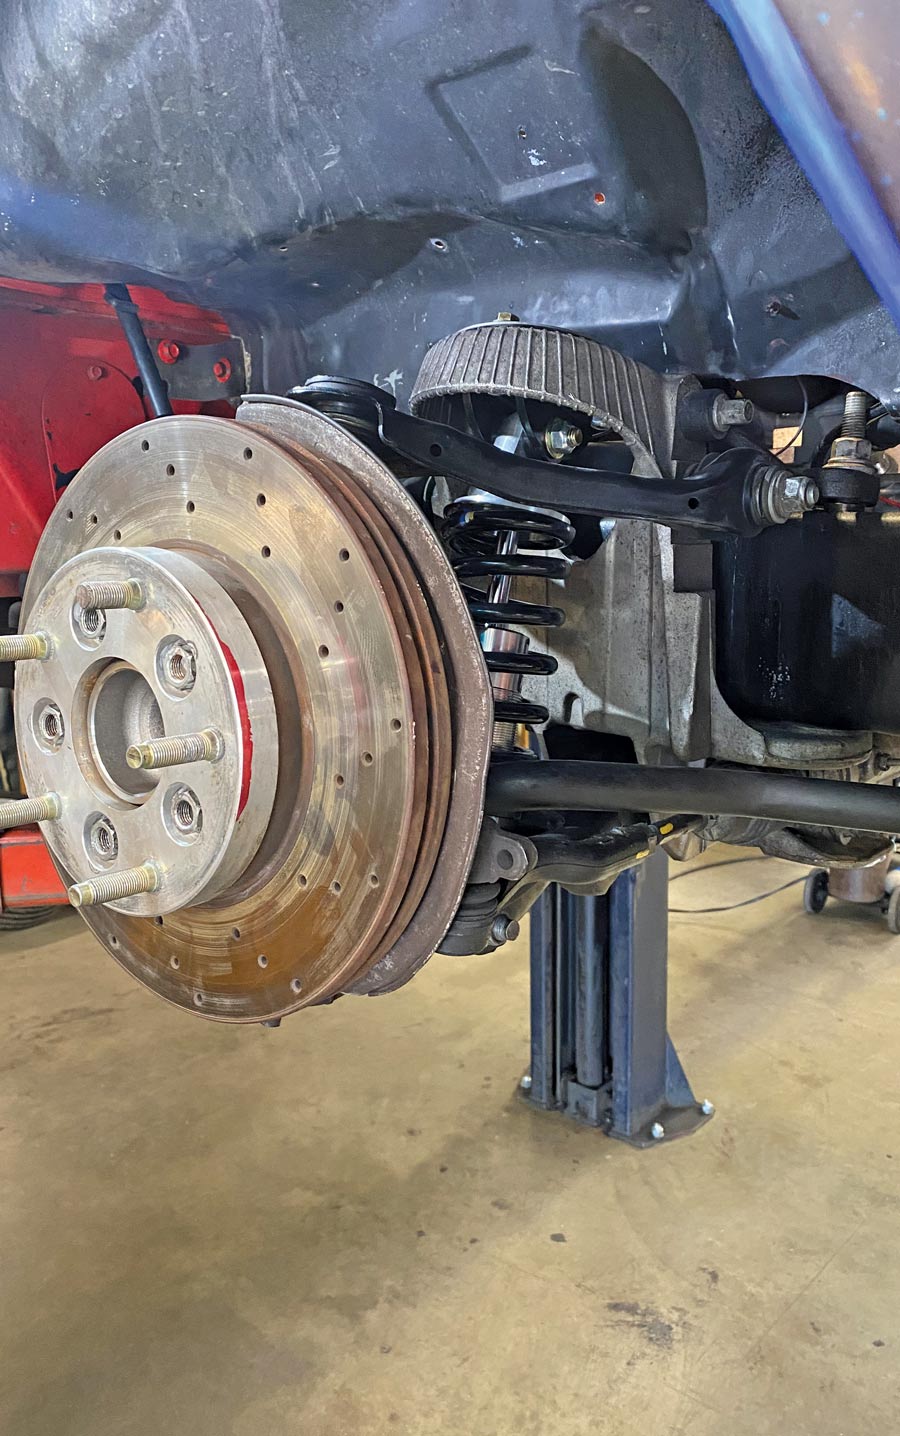 Now the sway bar can be reconnected and the brake caliper reinstalled.